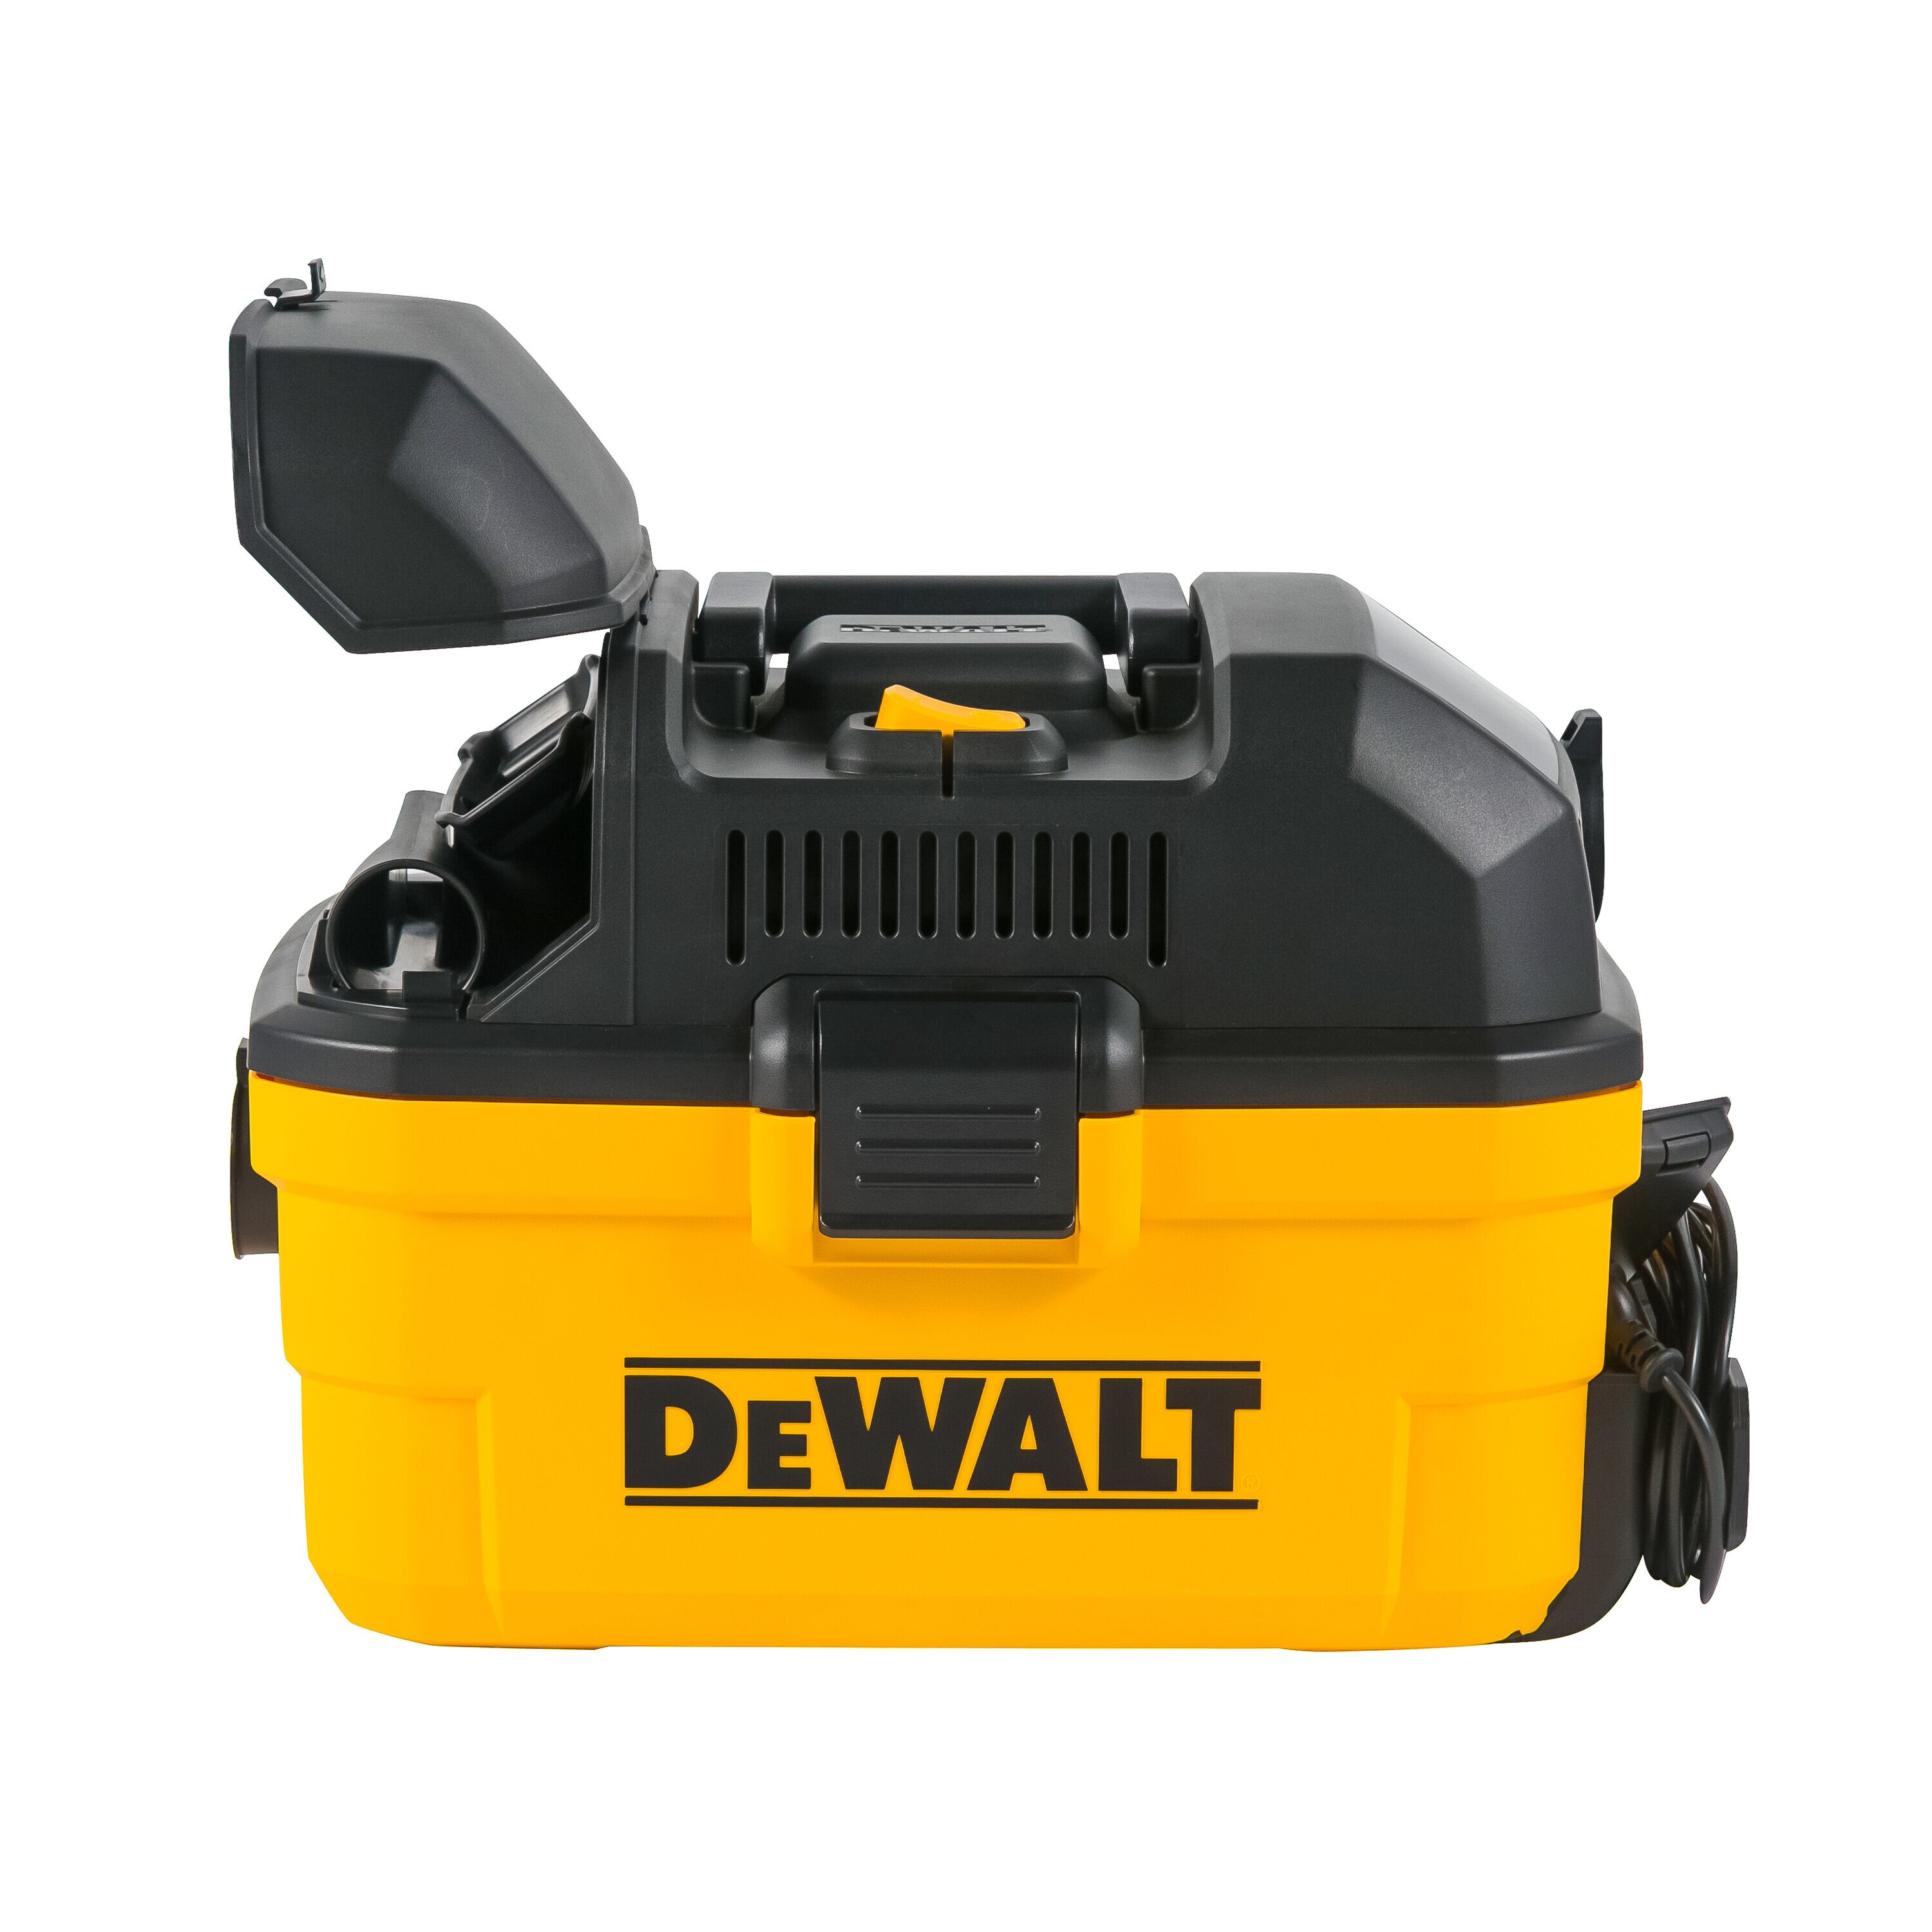 DEWALT 4-Gallons 5-HP Corded Wet/Dry Shop Vacuum with Accessories